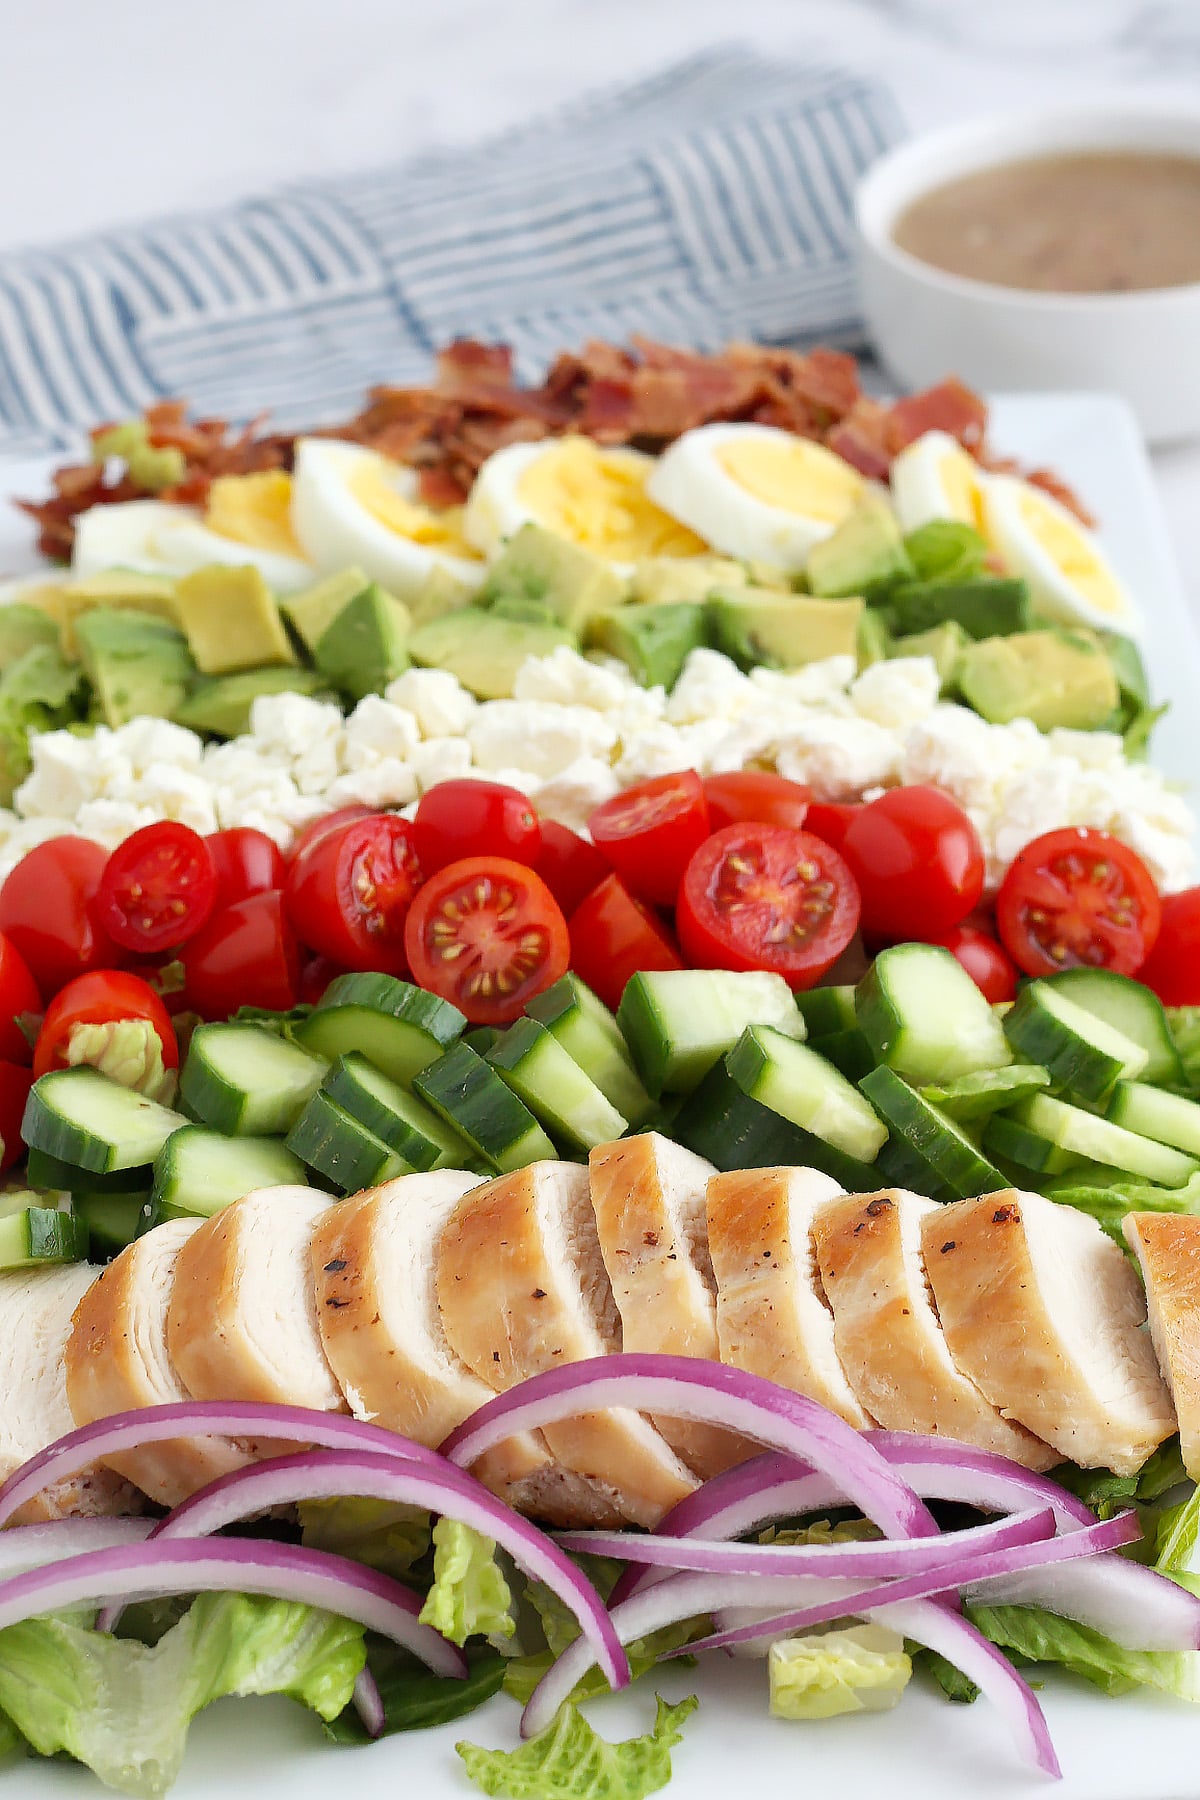 A close up photo of cobb salad with grilled chicken, cucumbers, tomatoes, feta cheese, diced avocado and bacon crumbles.